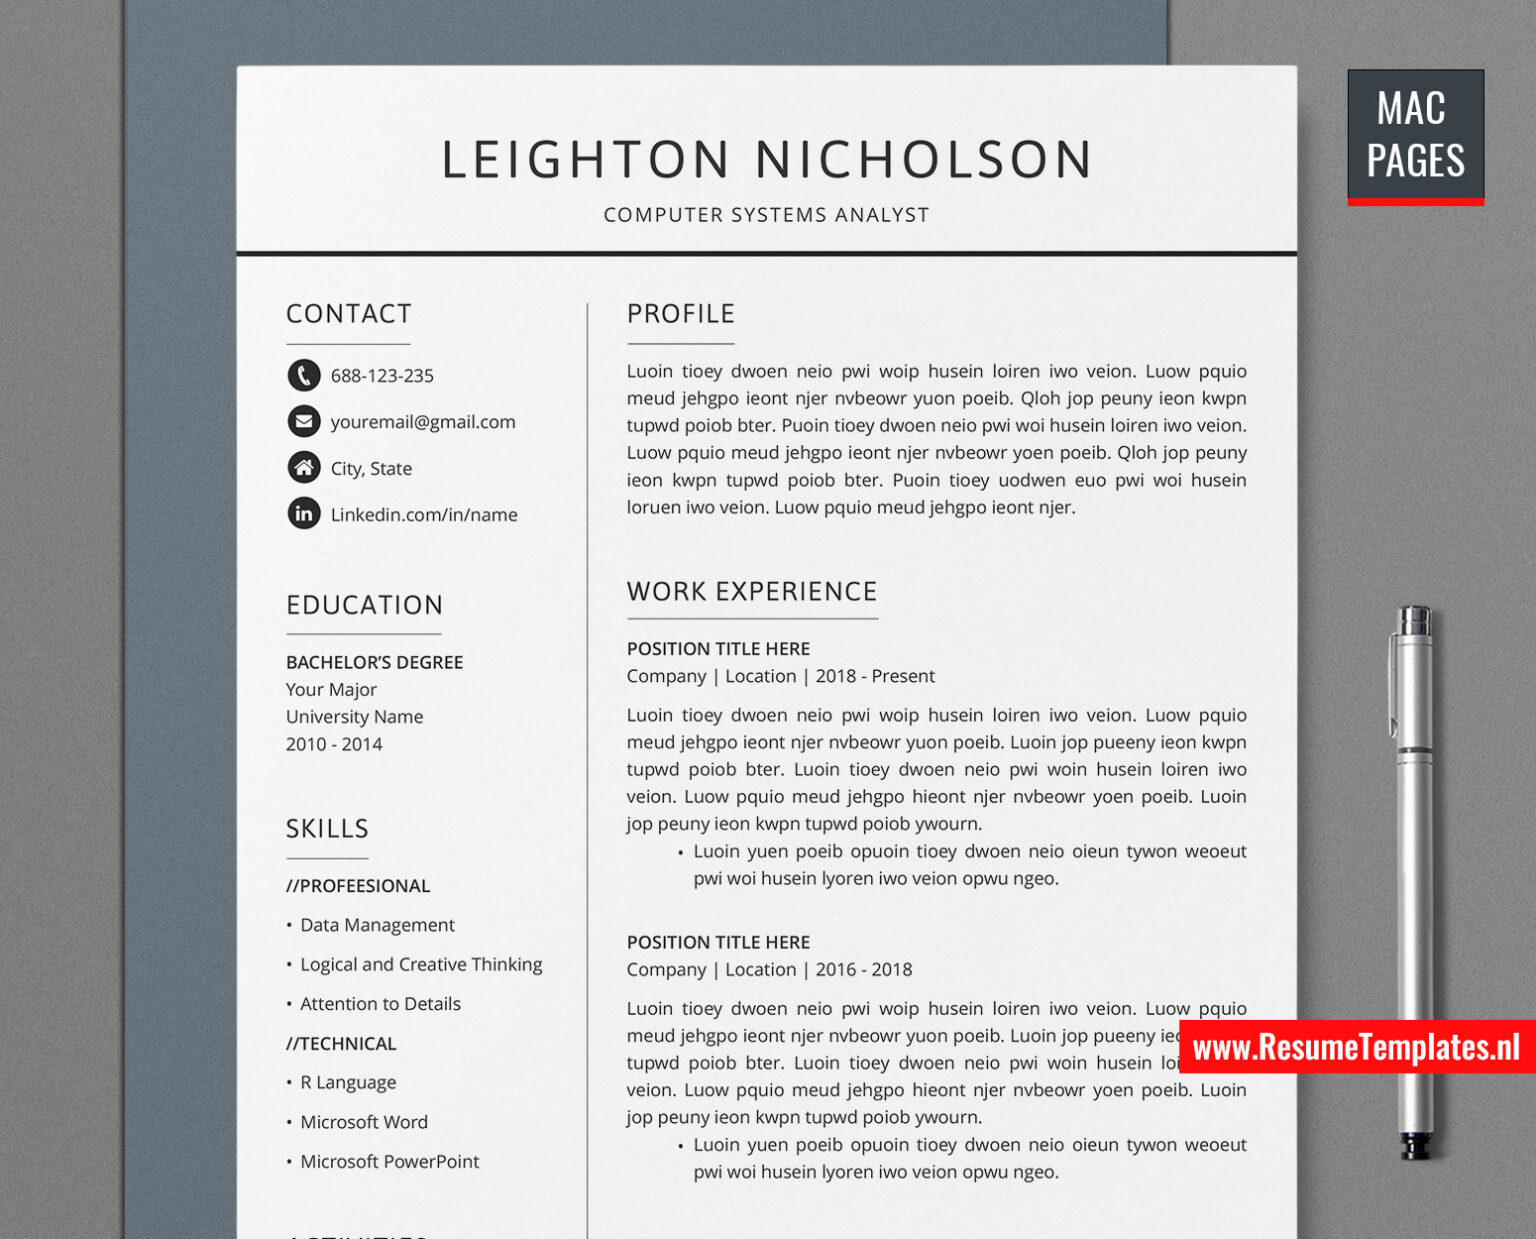 for-mac-pages-simple-cv-template-resume-template-for-mac-pages-cover-letter-curriculum